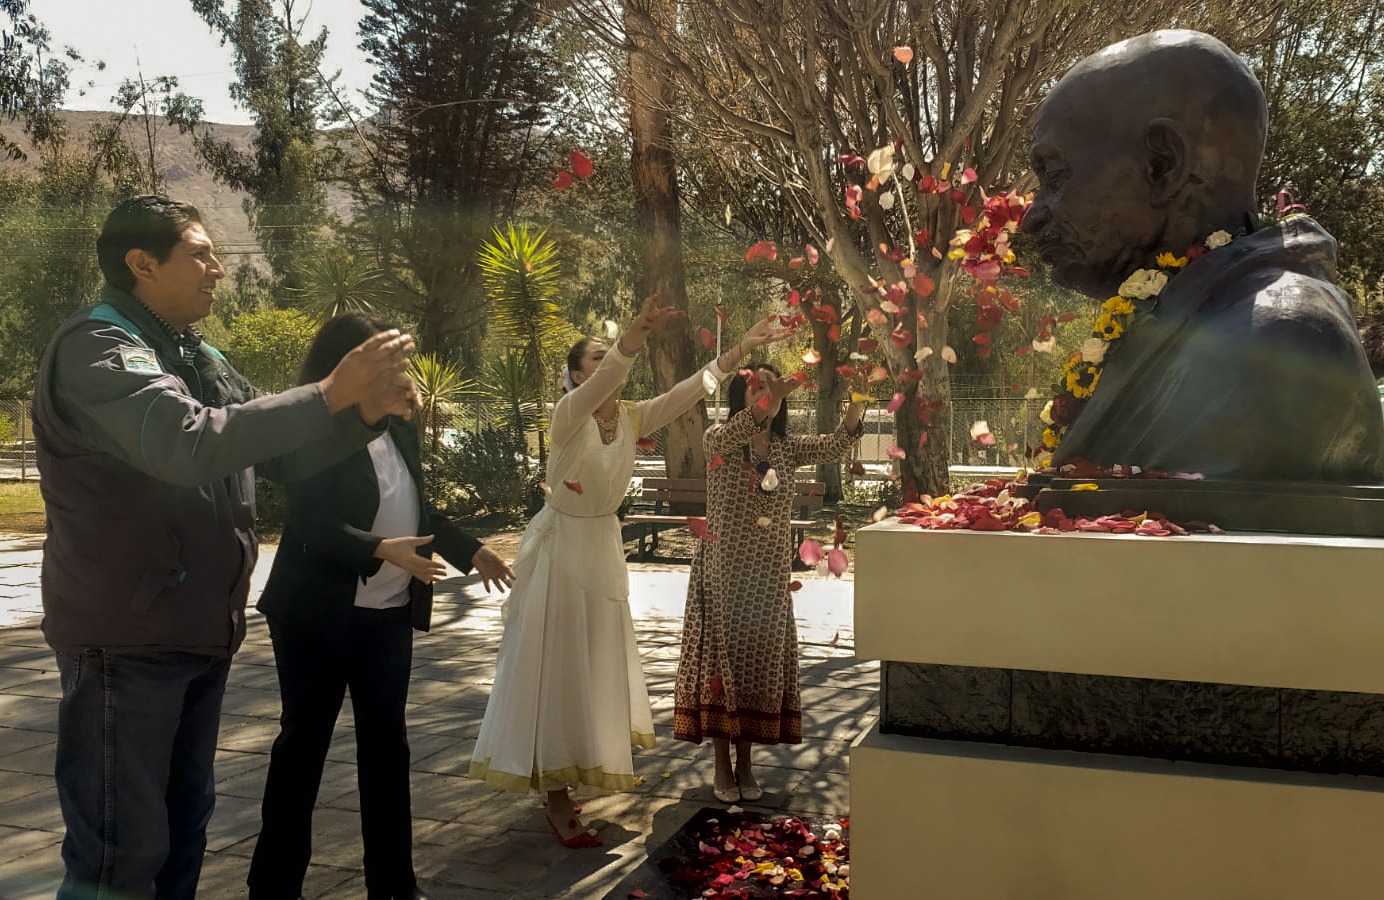 On the occasion of 154th Birth Anniversary of Mahatma Gandhi,  rich homage was paid at Parque Valle del Sol in La Paz, Bolivia. Gandhiji's life and message remains a source of strength and inspiration for many world over. 